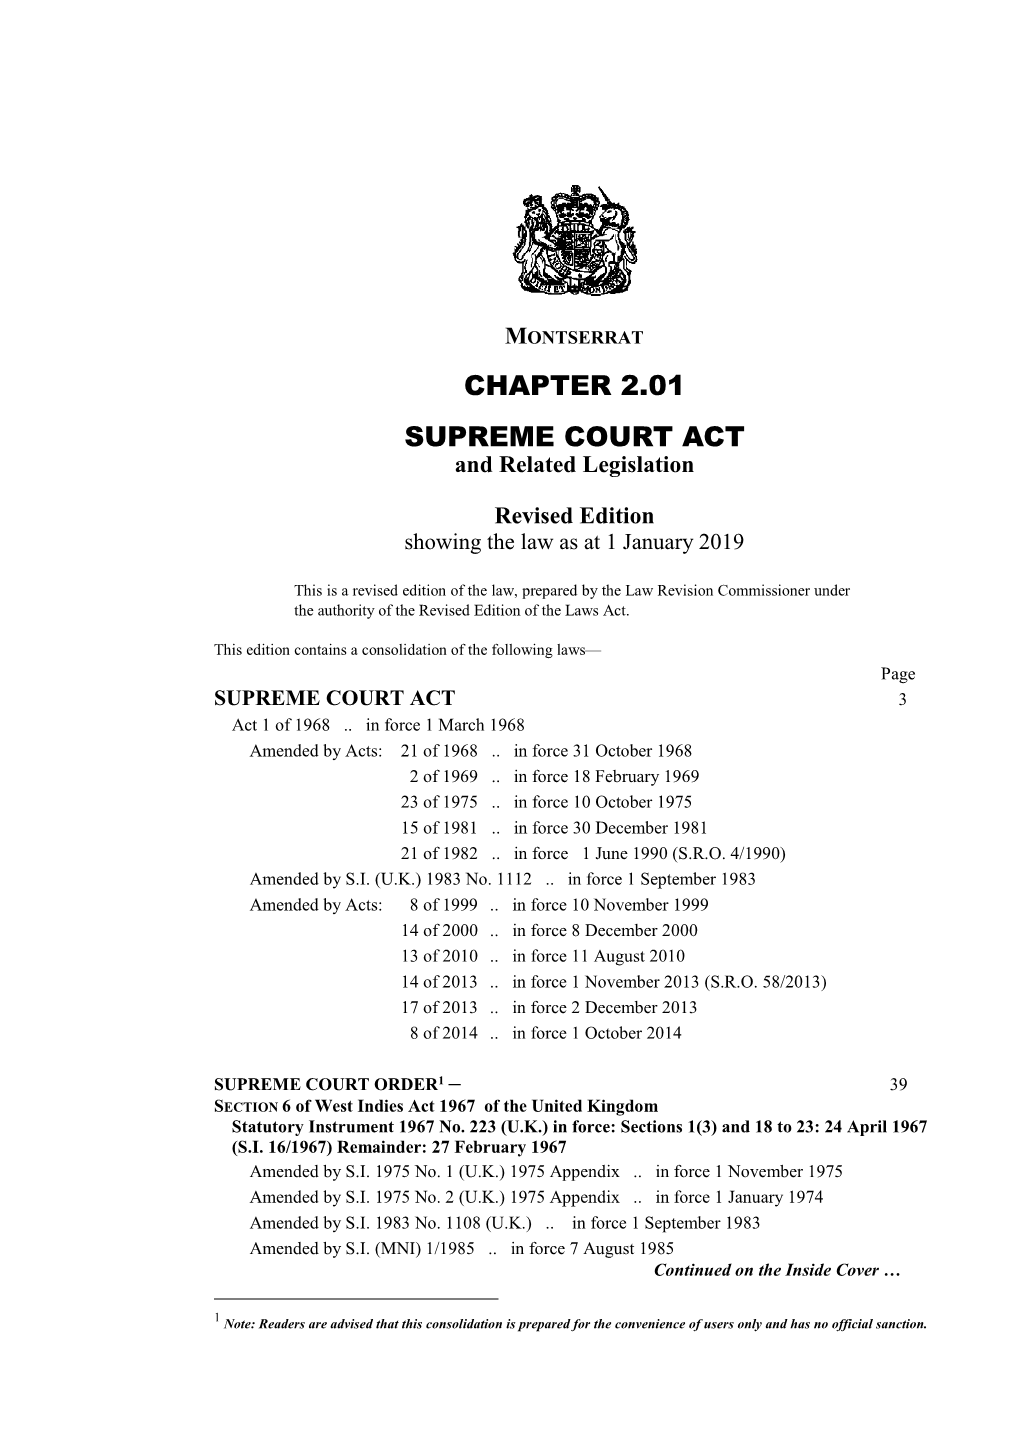 CHAPTER 2.01 SUPREME COURT ACT and Related Legislation